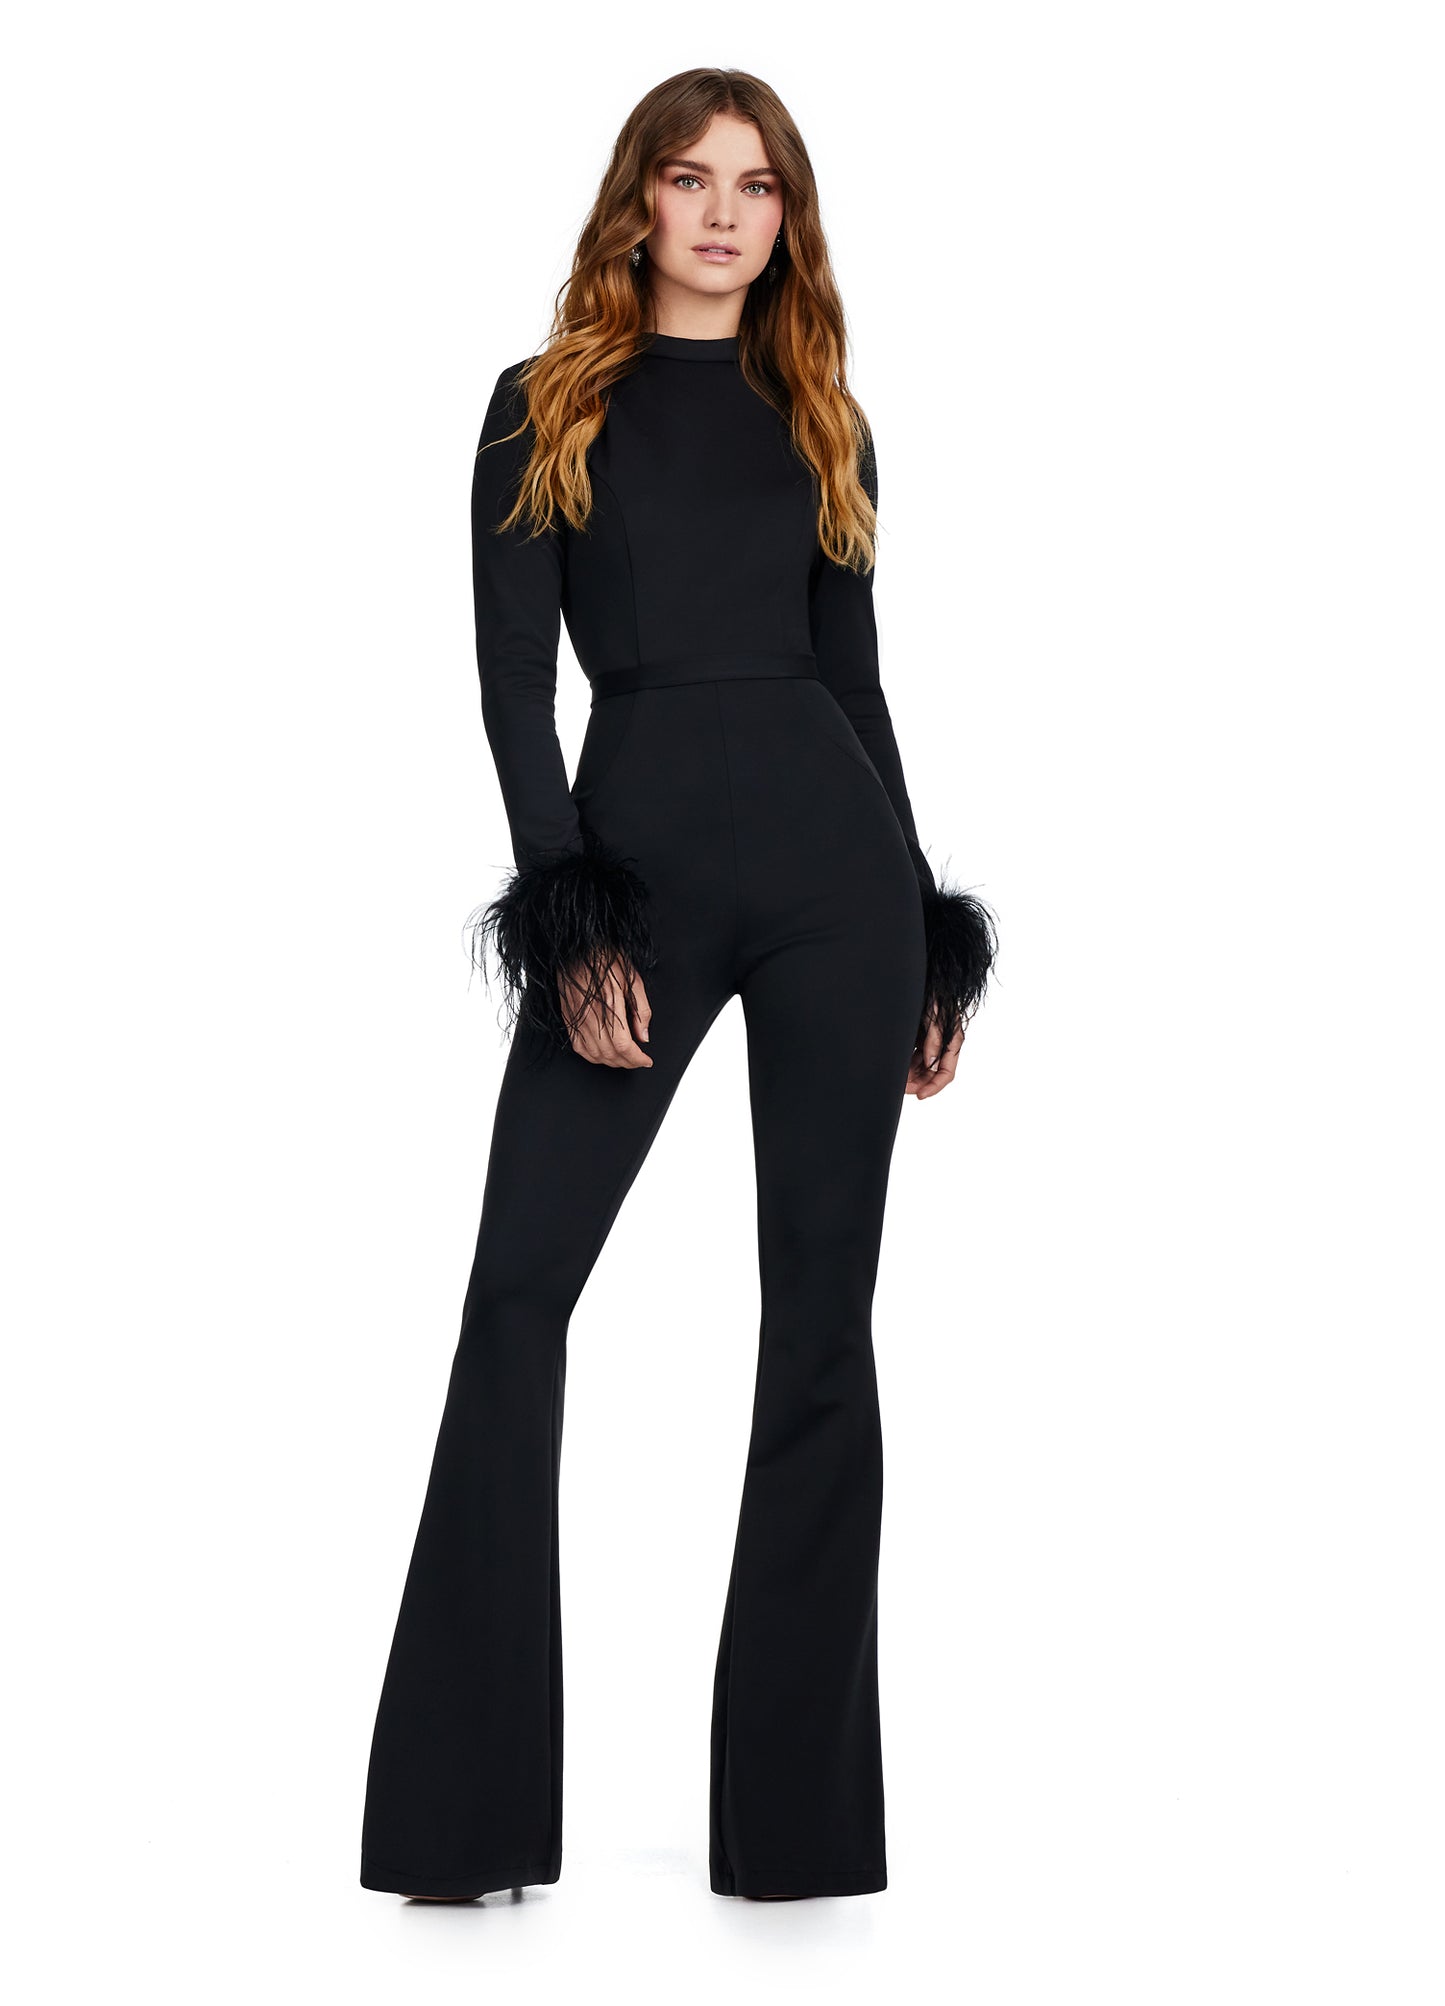 Discover the elegance of the Ashley Lauren 11441 Prom Scuba Jumpsuit. Featuring a stunning open back design and delicate feather detailing, this jumpsuit is sure to make a statement at any formal event. Made with high-quality scuba material, it offers both comfort and style for a night to remember. Time to make a statement in scuba! With the feather cuffs and back cut out this jumpsuit is sure to turn heads.